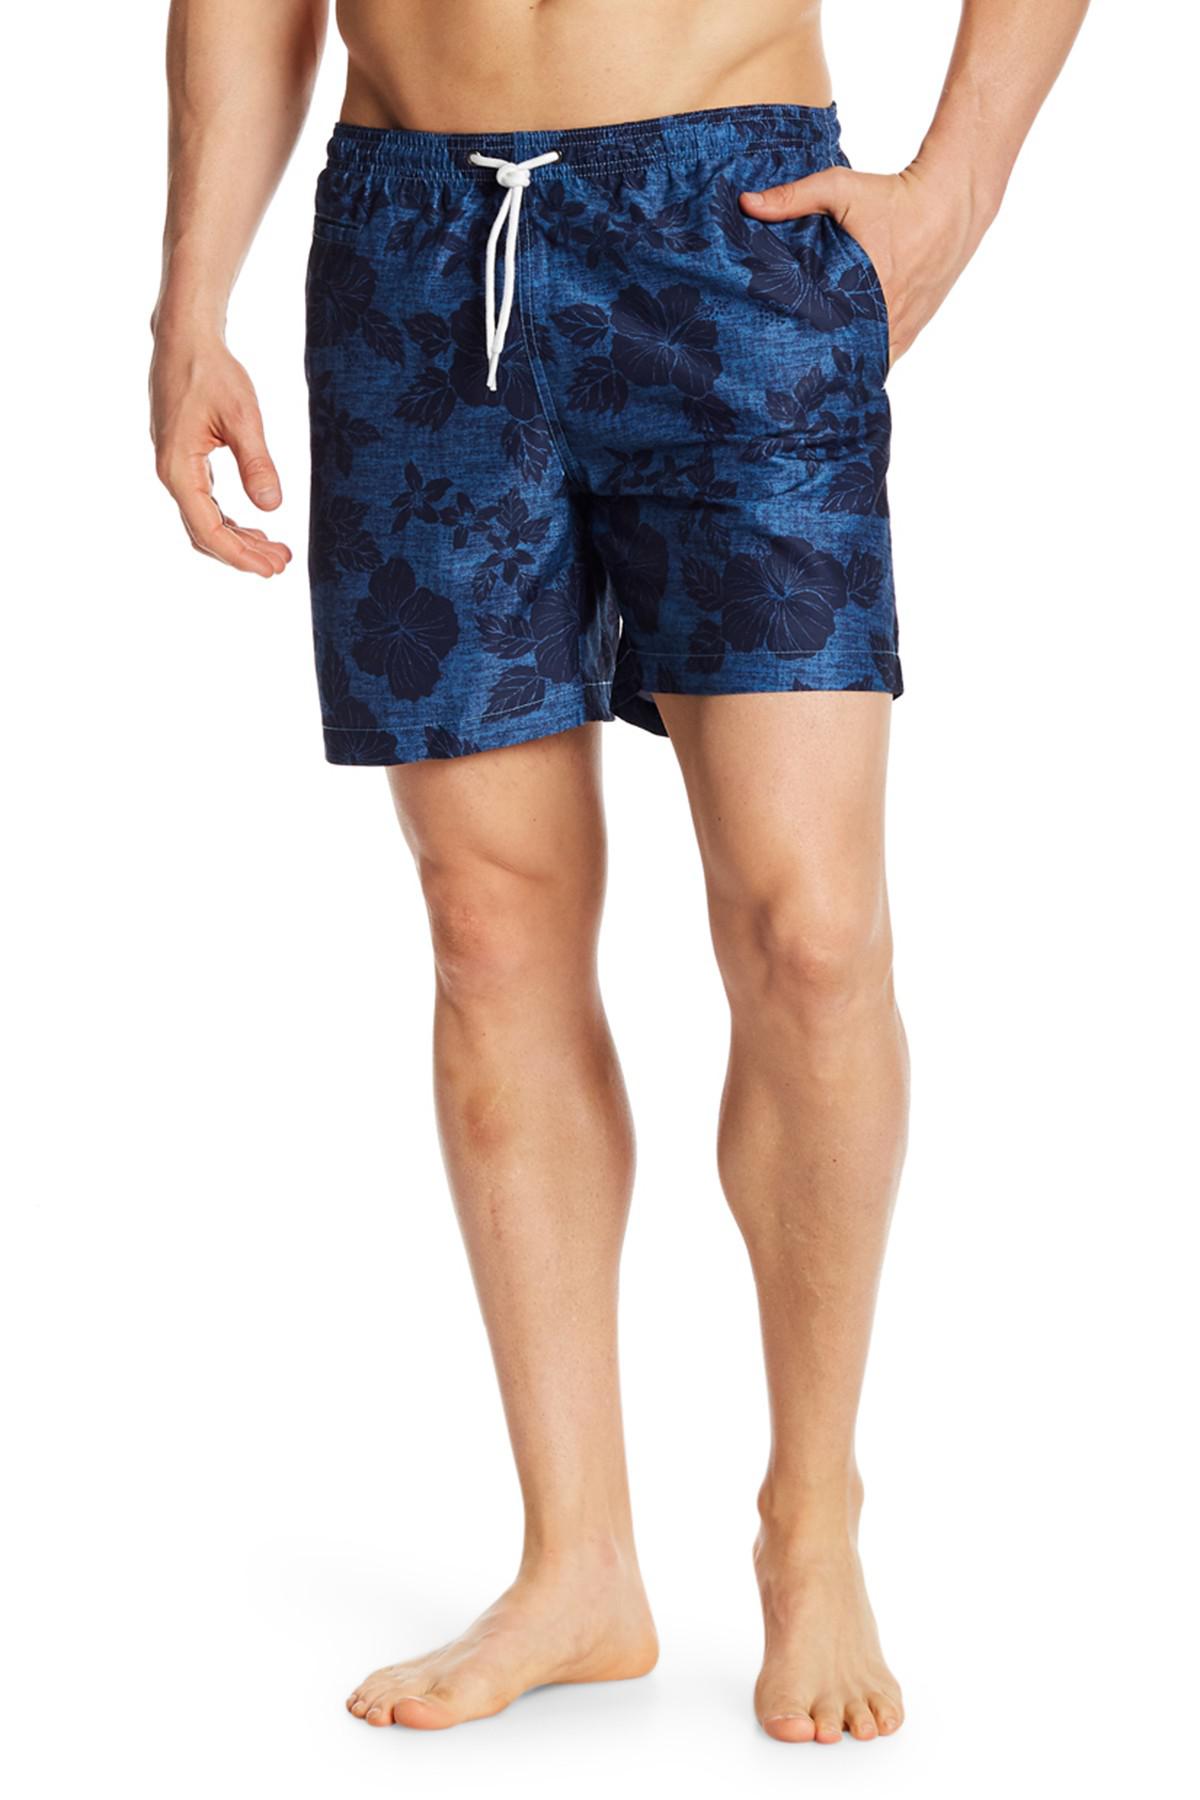 Lyst - Trunks Surf And Swim Co Chambray Hawaiian Trunk Shorts in Blue ...